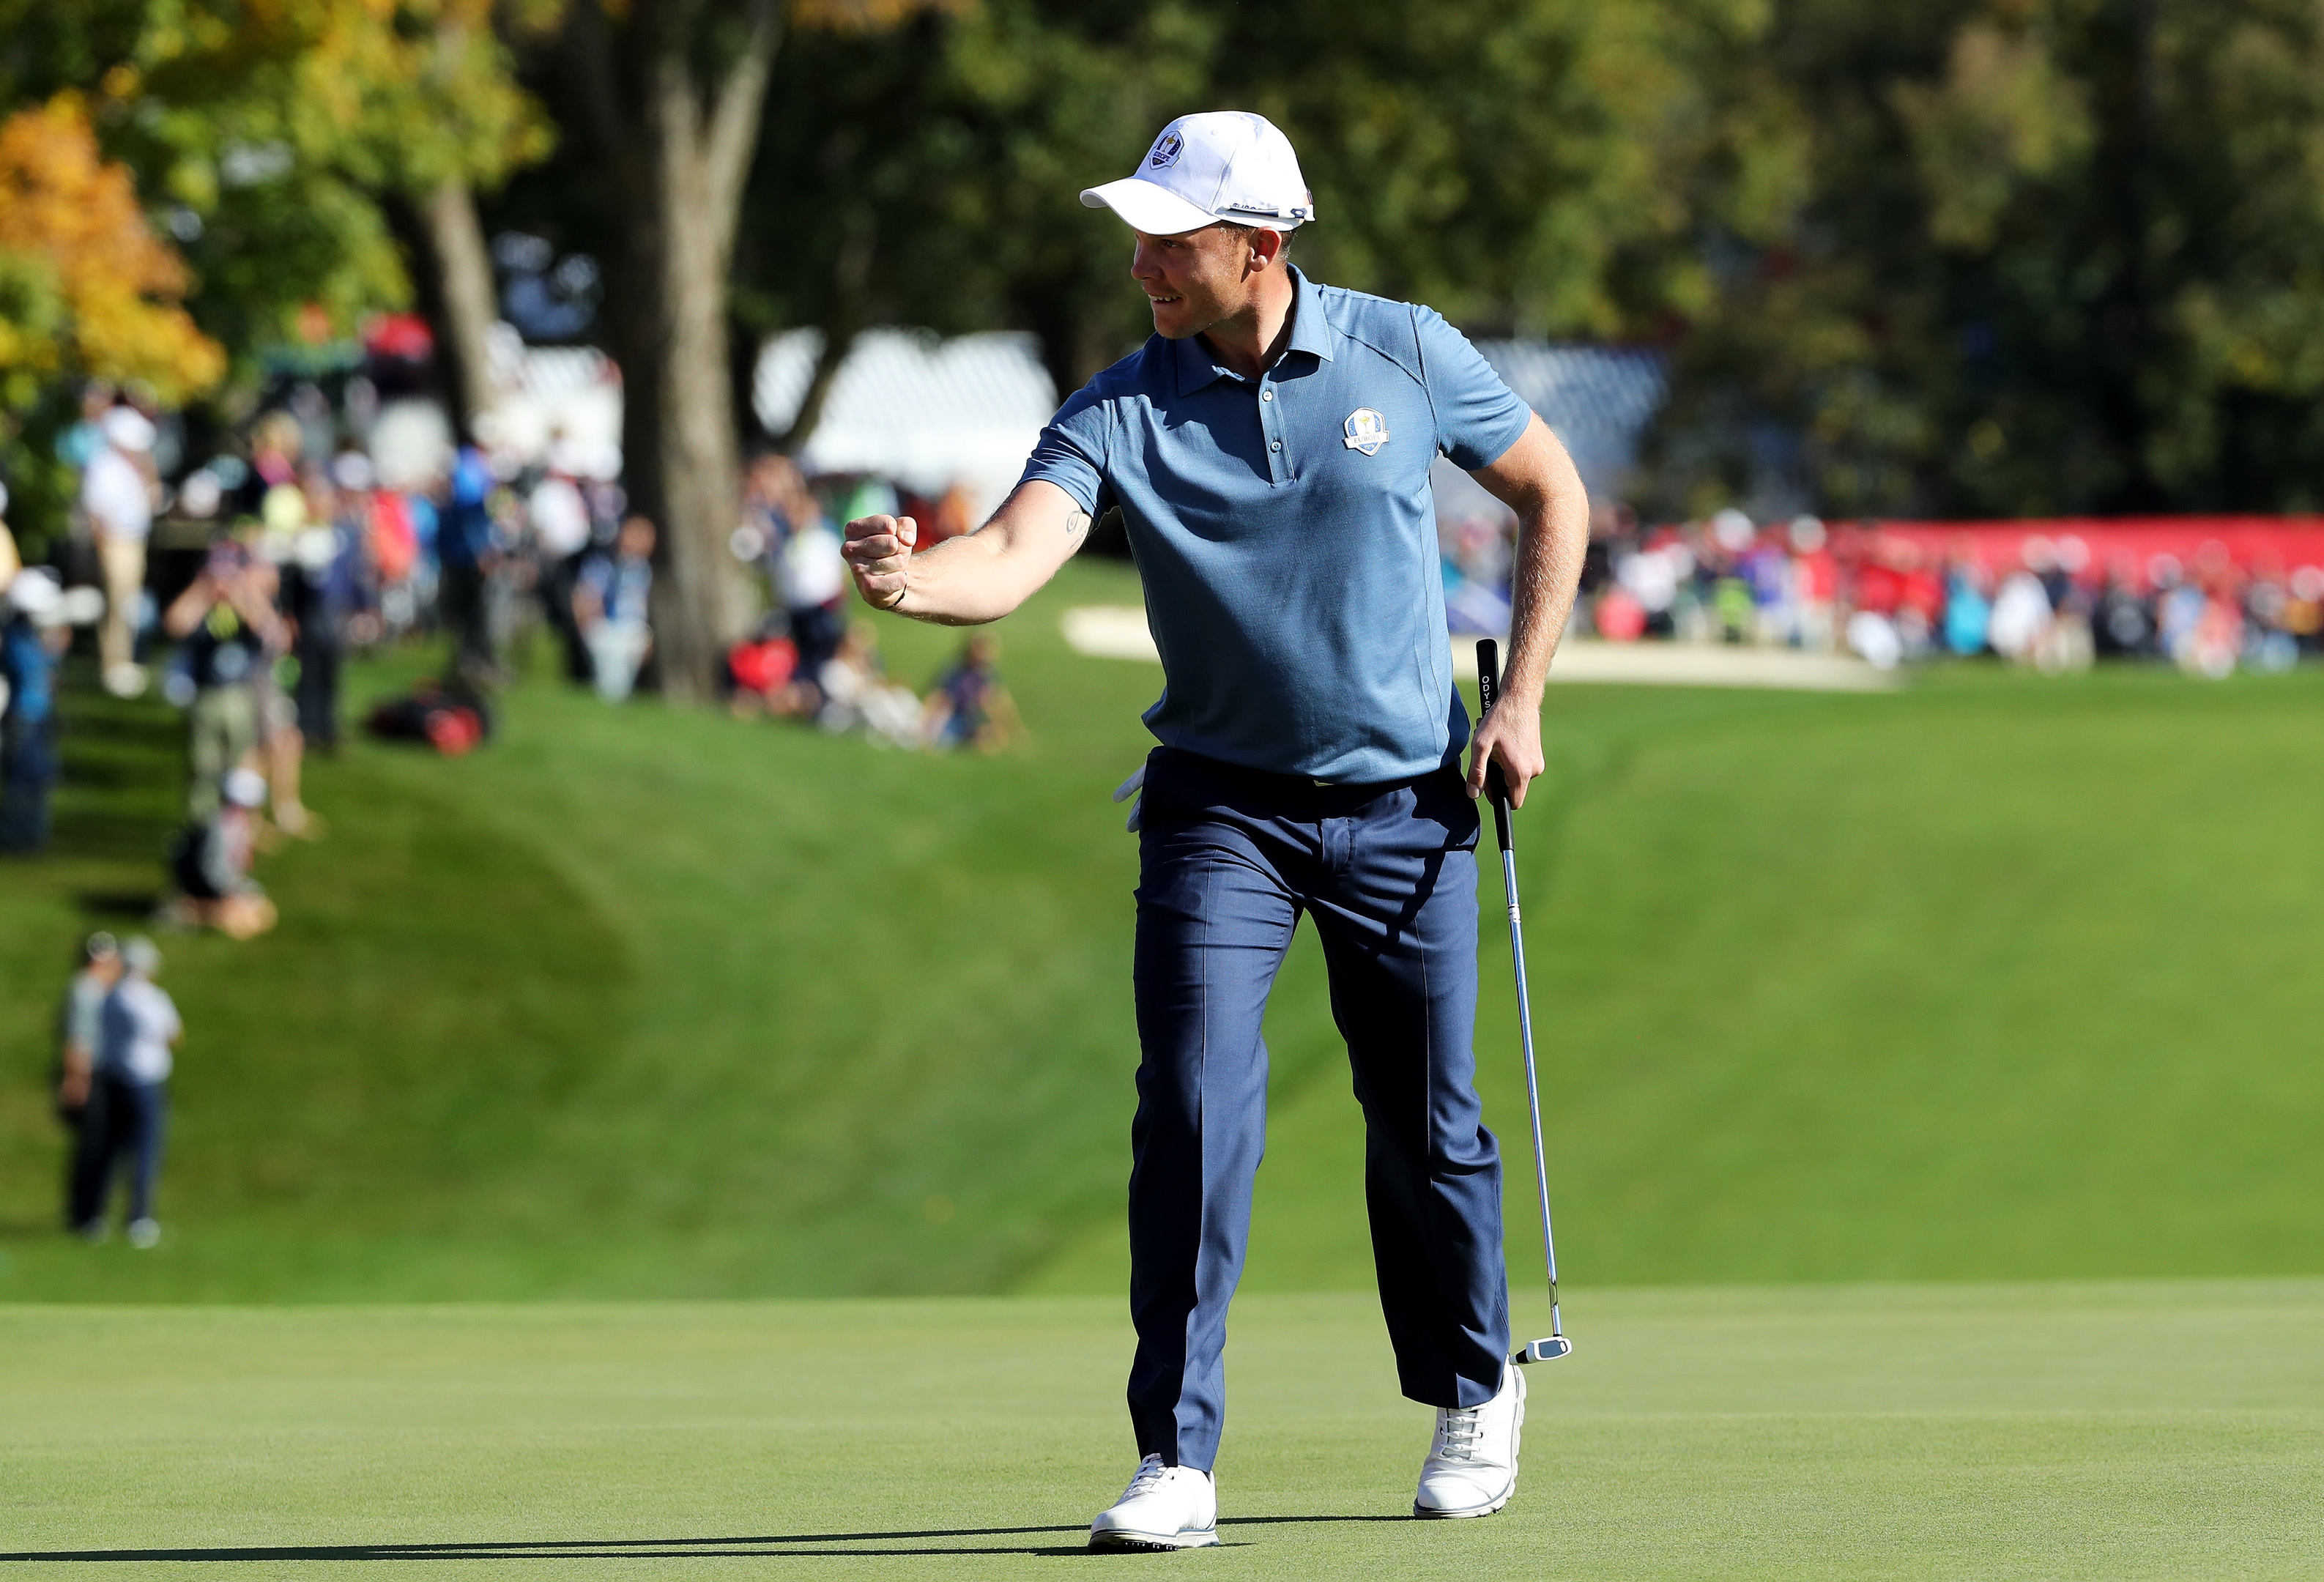 Danny Willett holed a couple of birdie putts in the afternoon, but the Masters champion couldn't get a point.